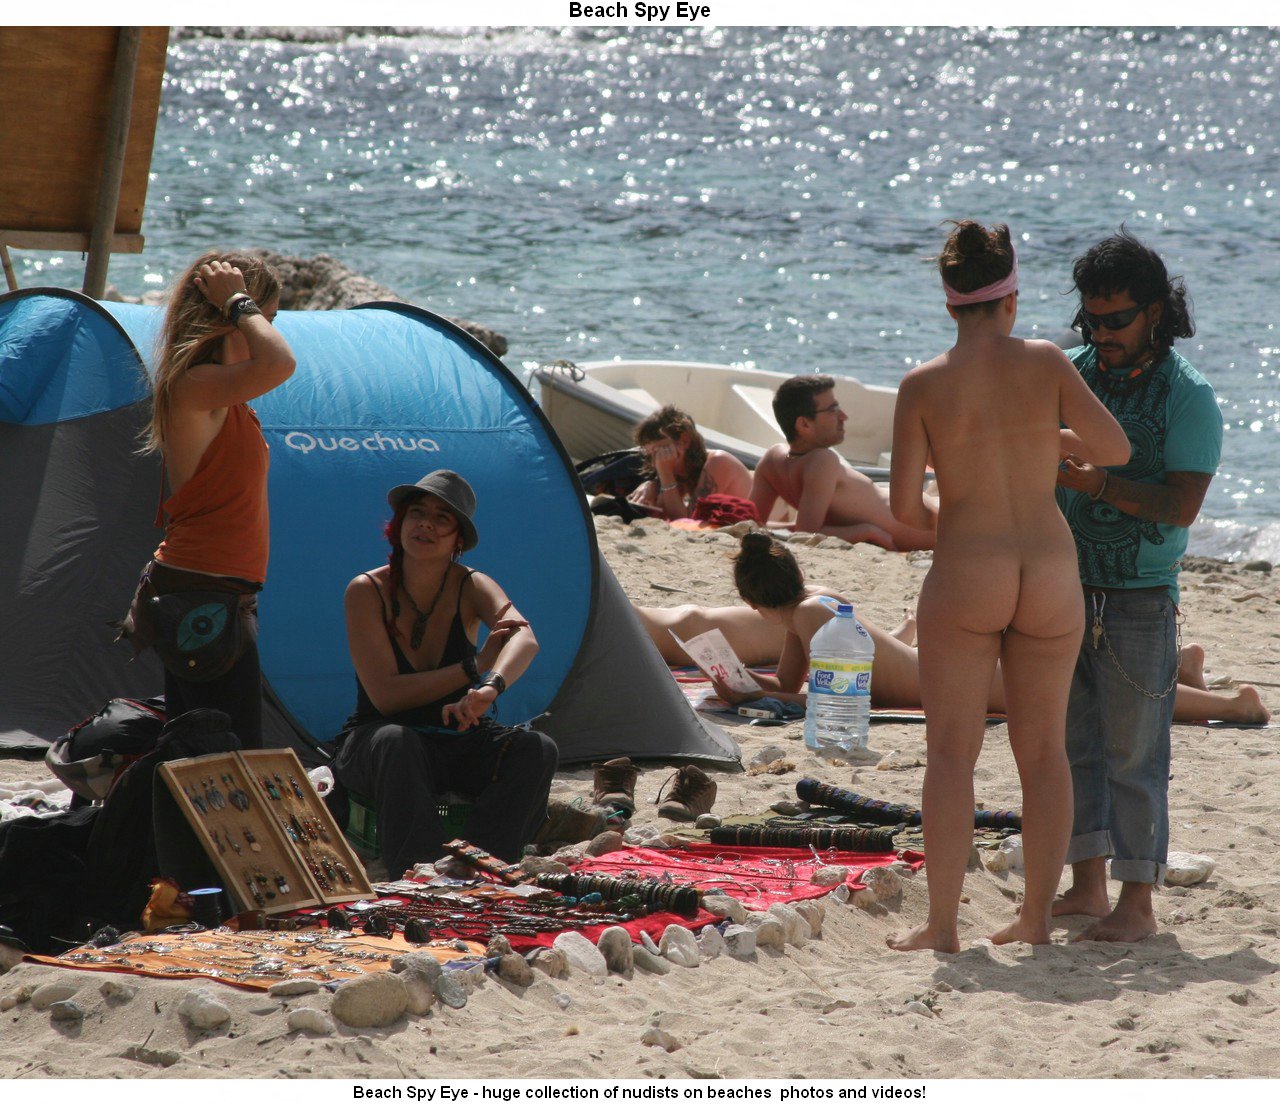 Nude Beaches Pics Nudist beach photos - adorable blonds and brunet.. photography 5